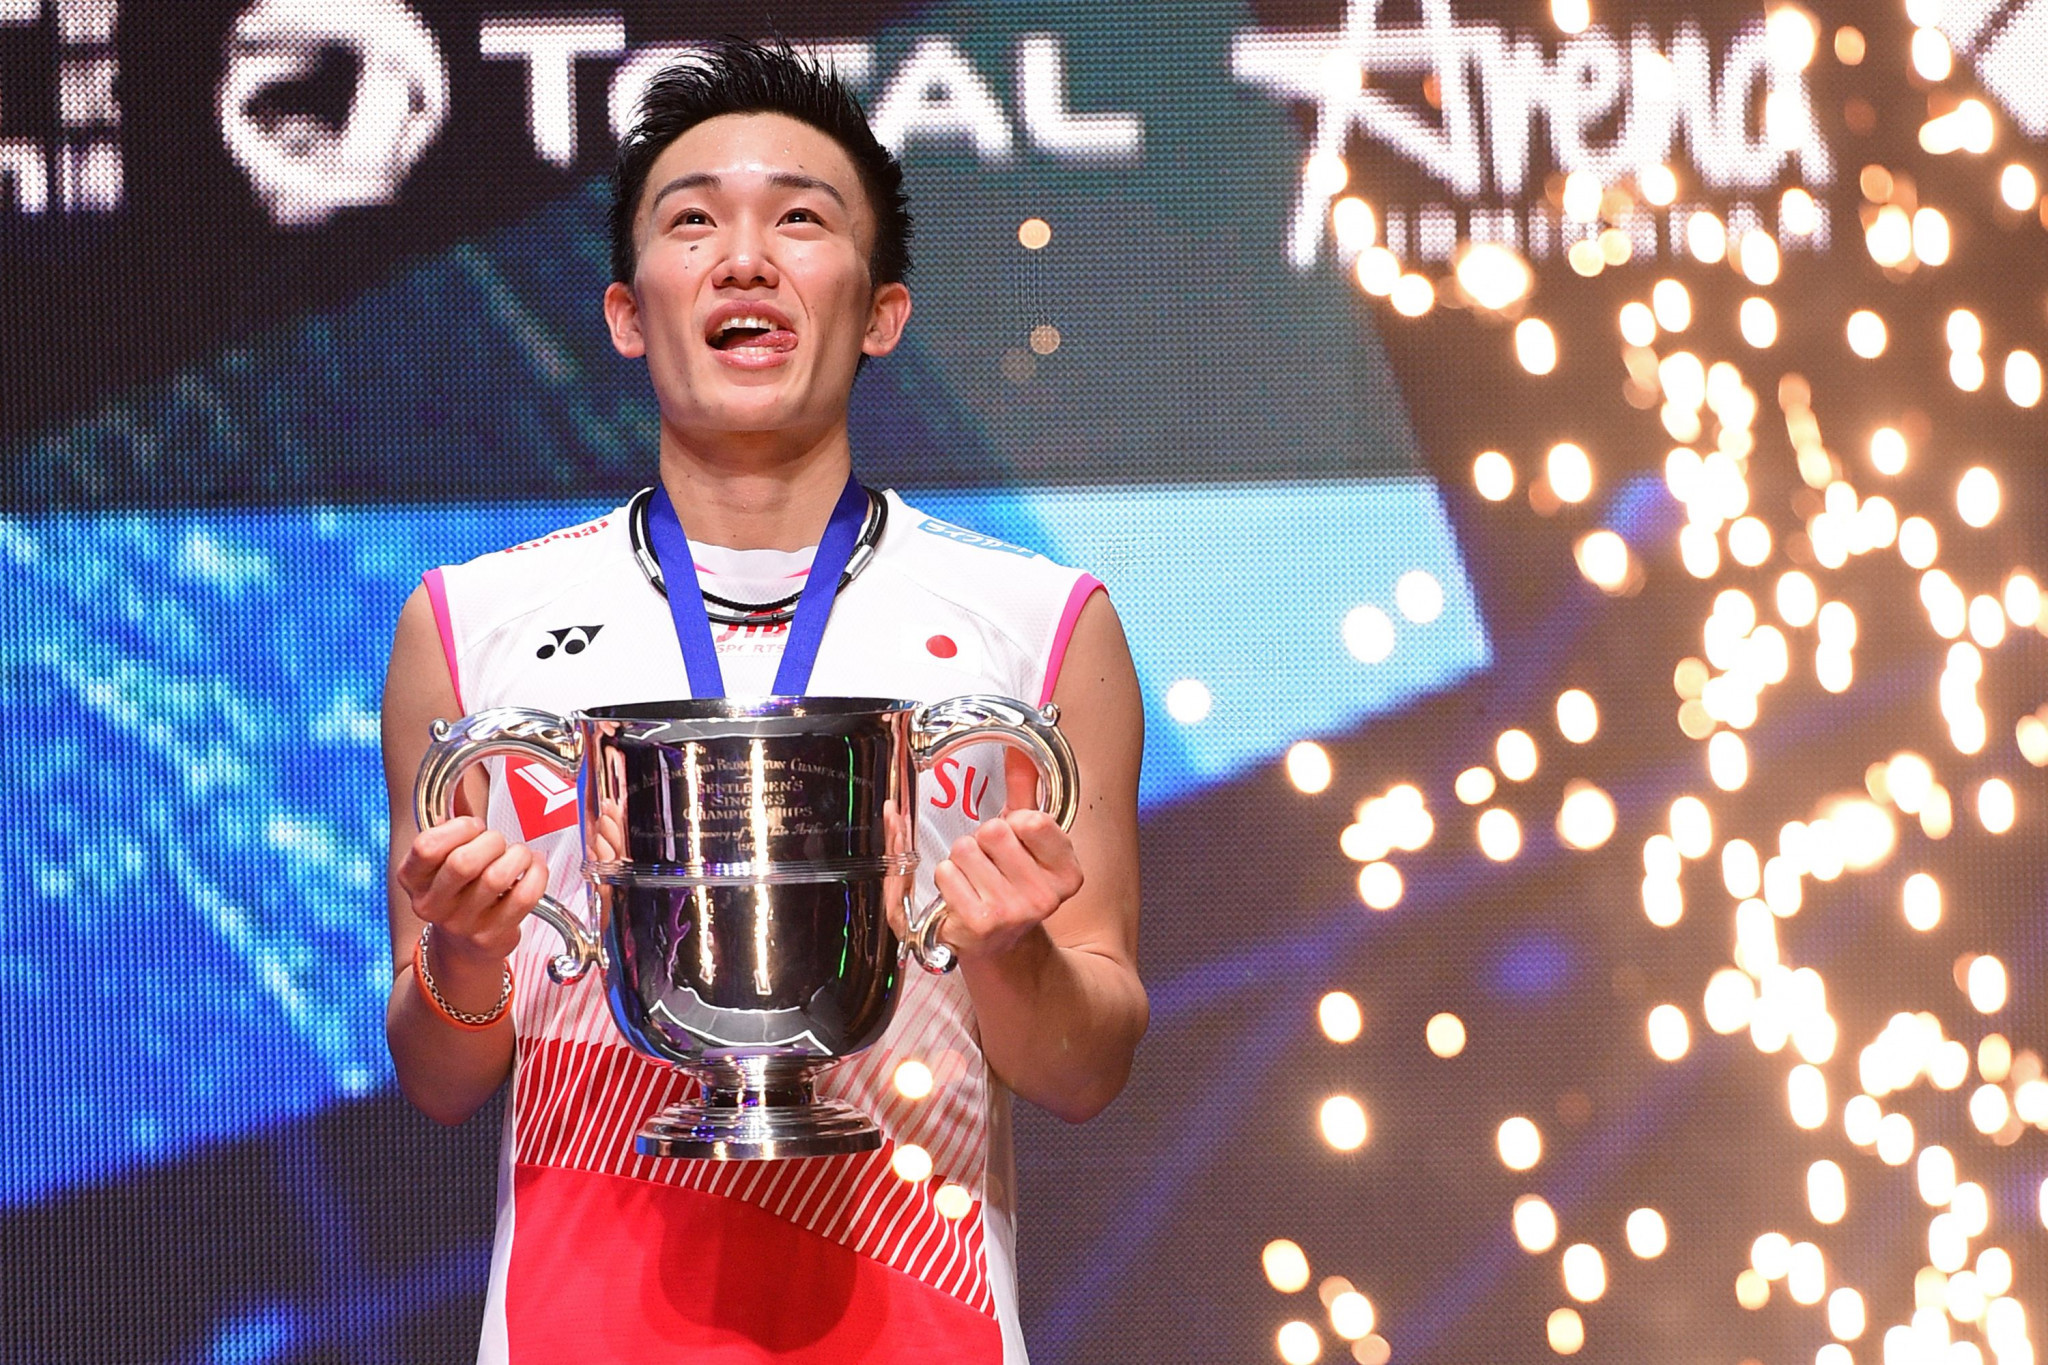 Japan's reigning world champion Kento Momota won a maiden All England Open Badminton Championships title ©Getty Images